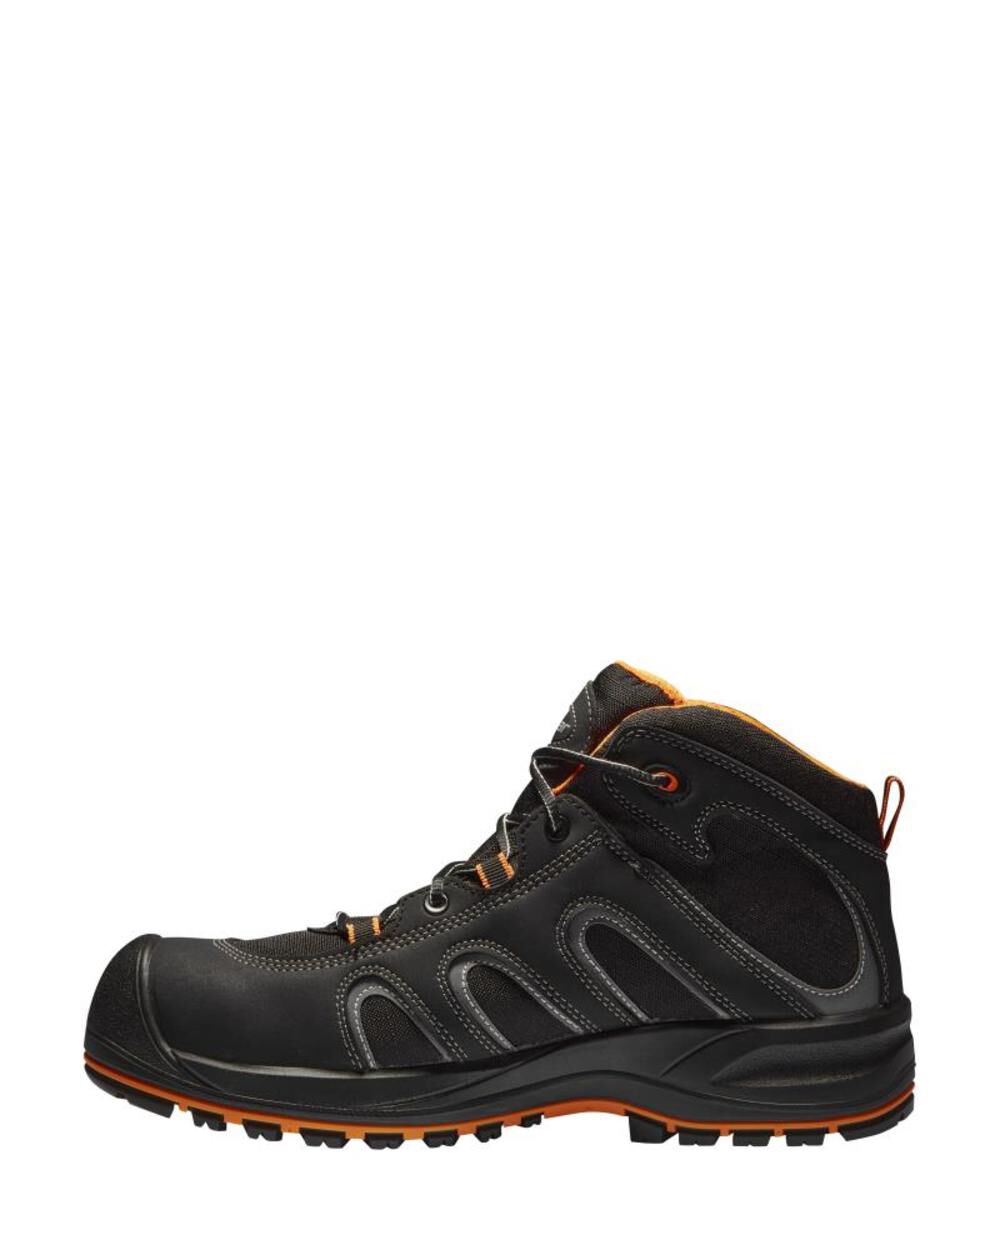 Gear Safety Shoes Falcon Size 13 SGUS73002130